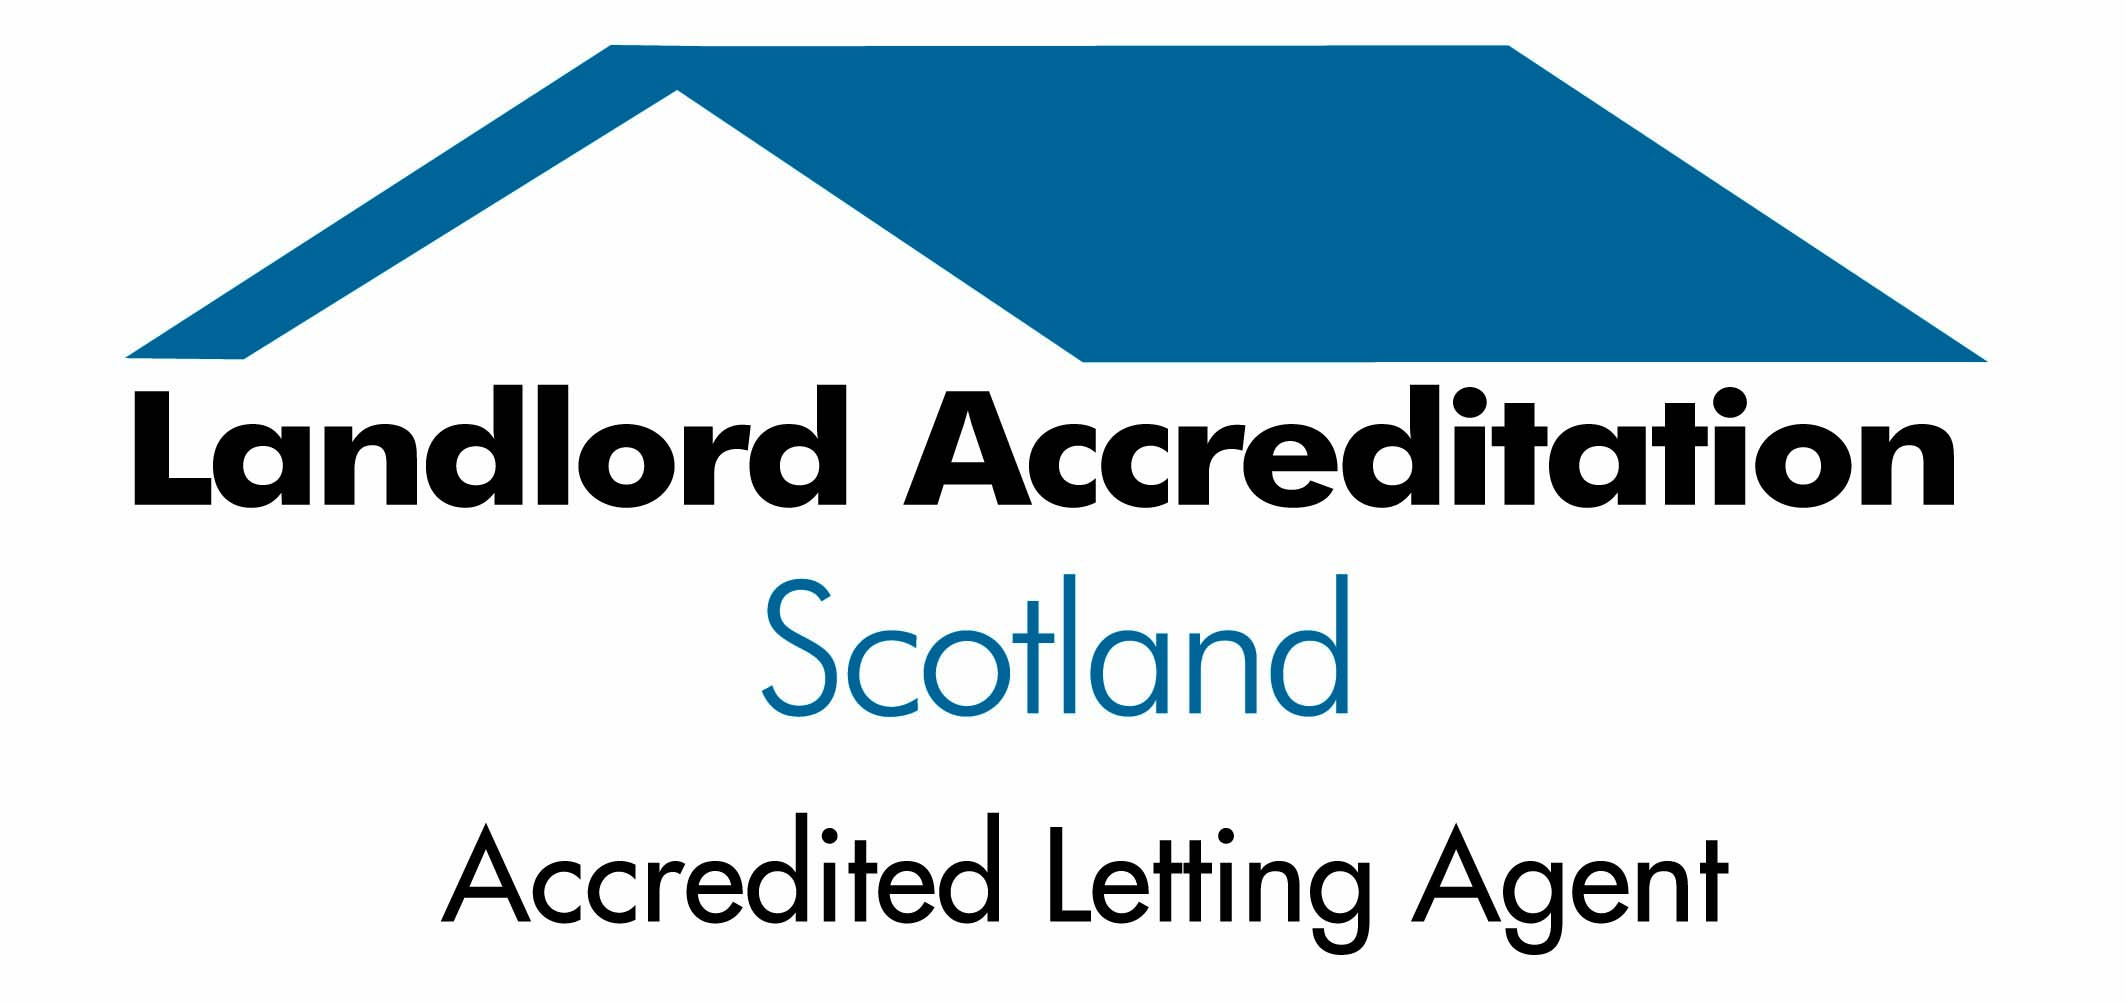 Accredited Letting